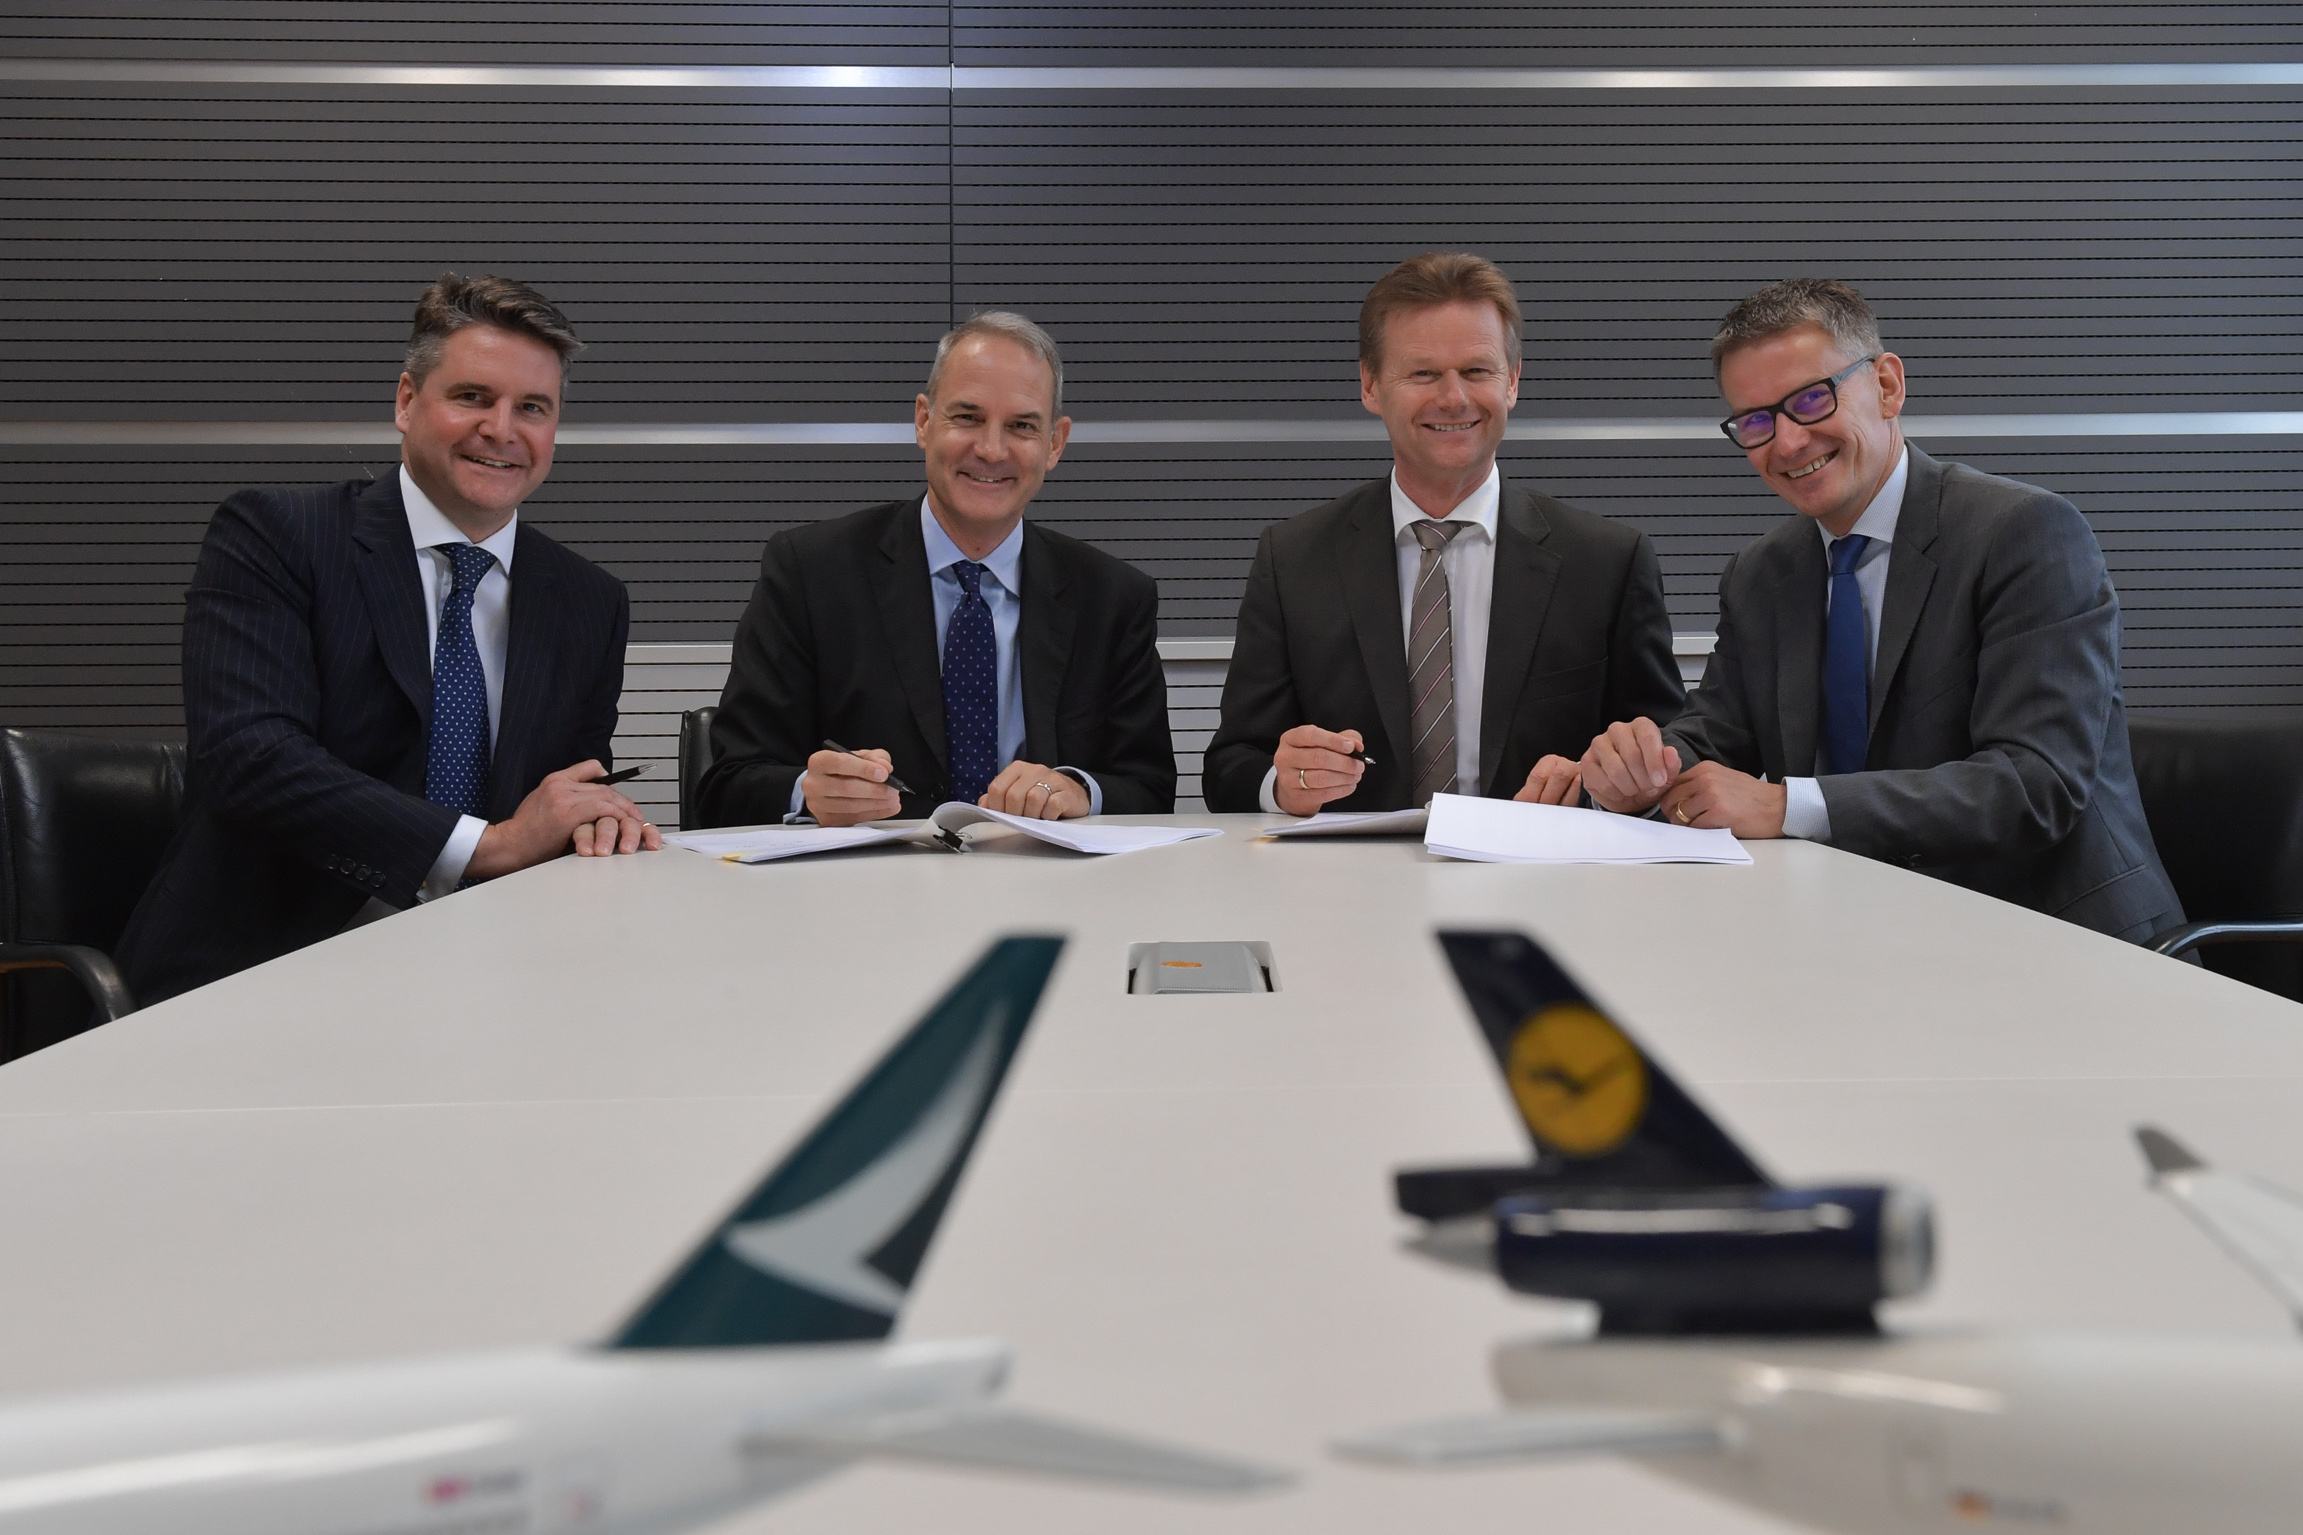 LH Cargo and Cathay Pacific merge their cargo handling in Frankfurt